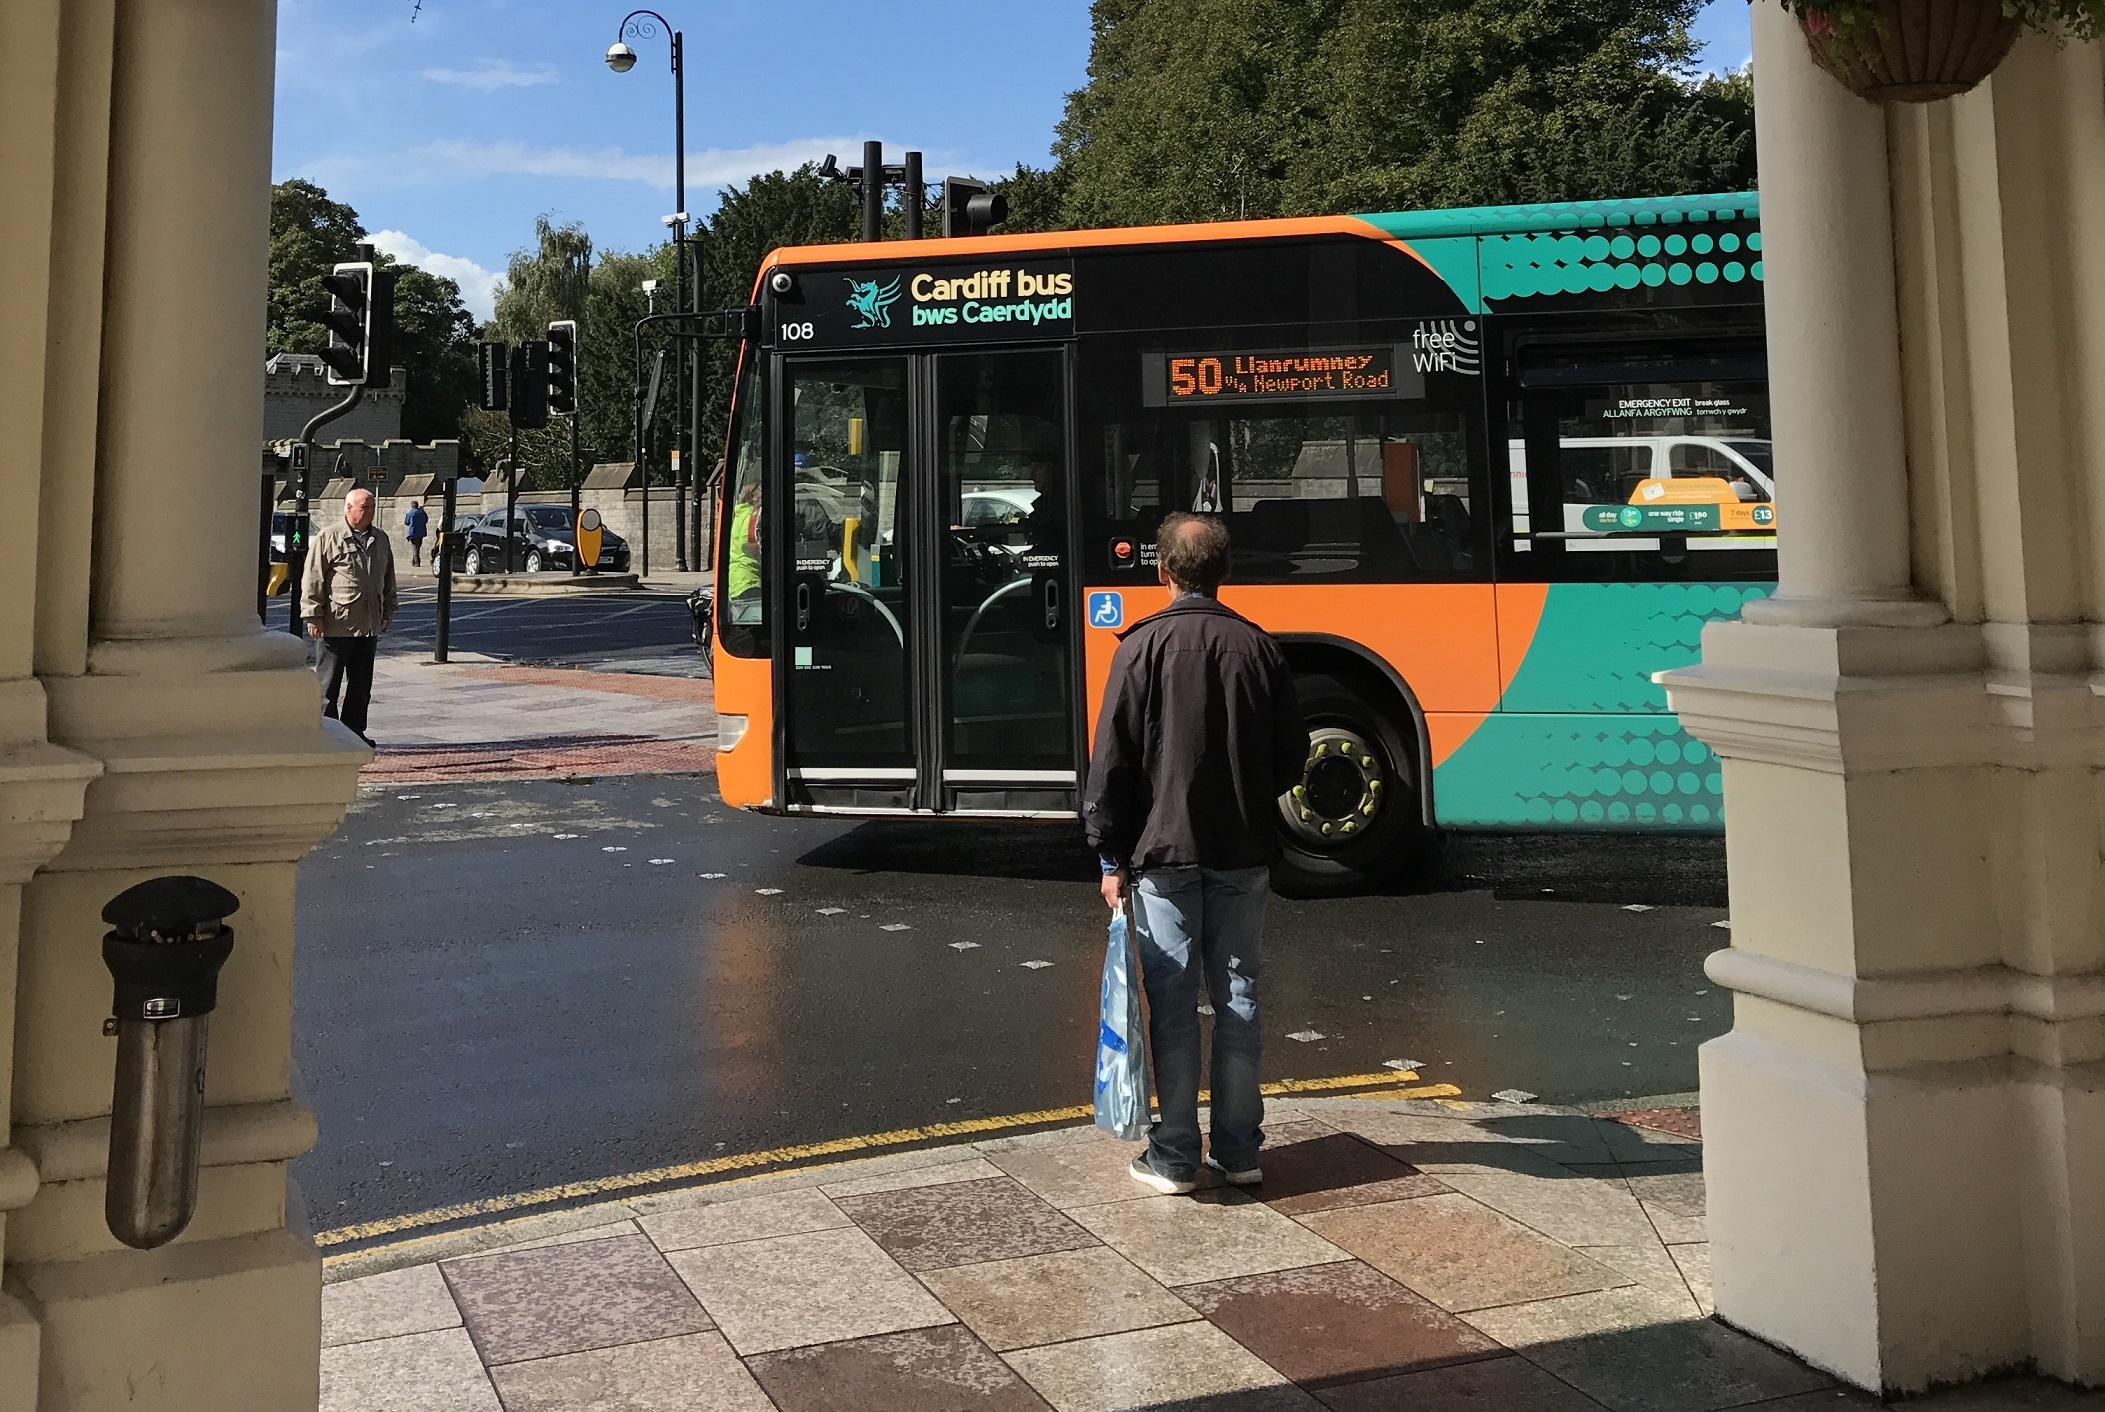 Future of bus travel in Wales examined in report